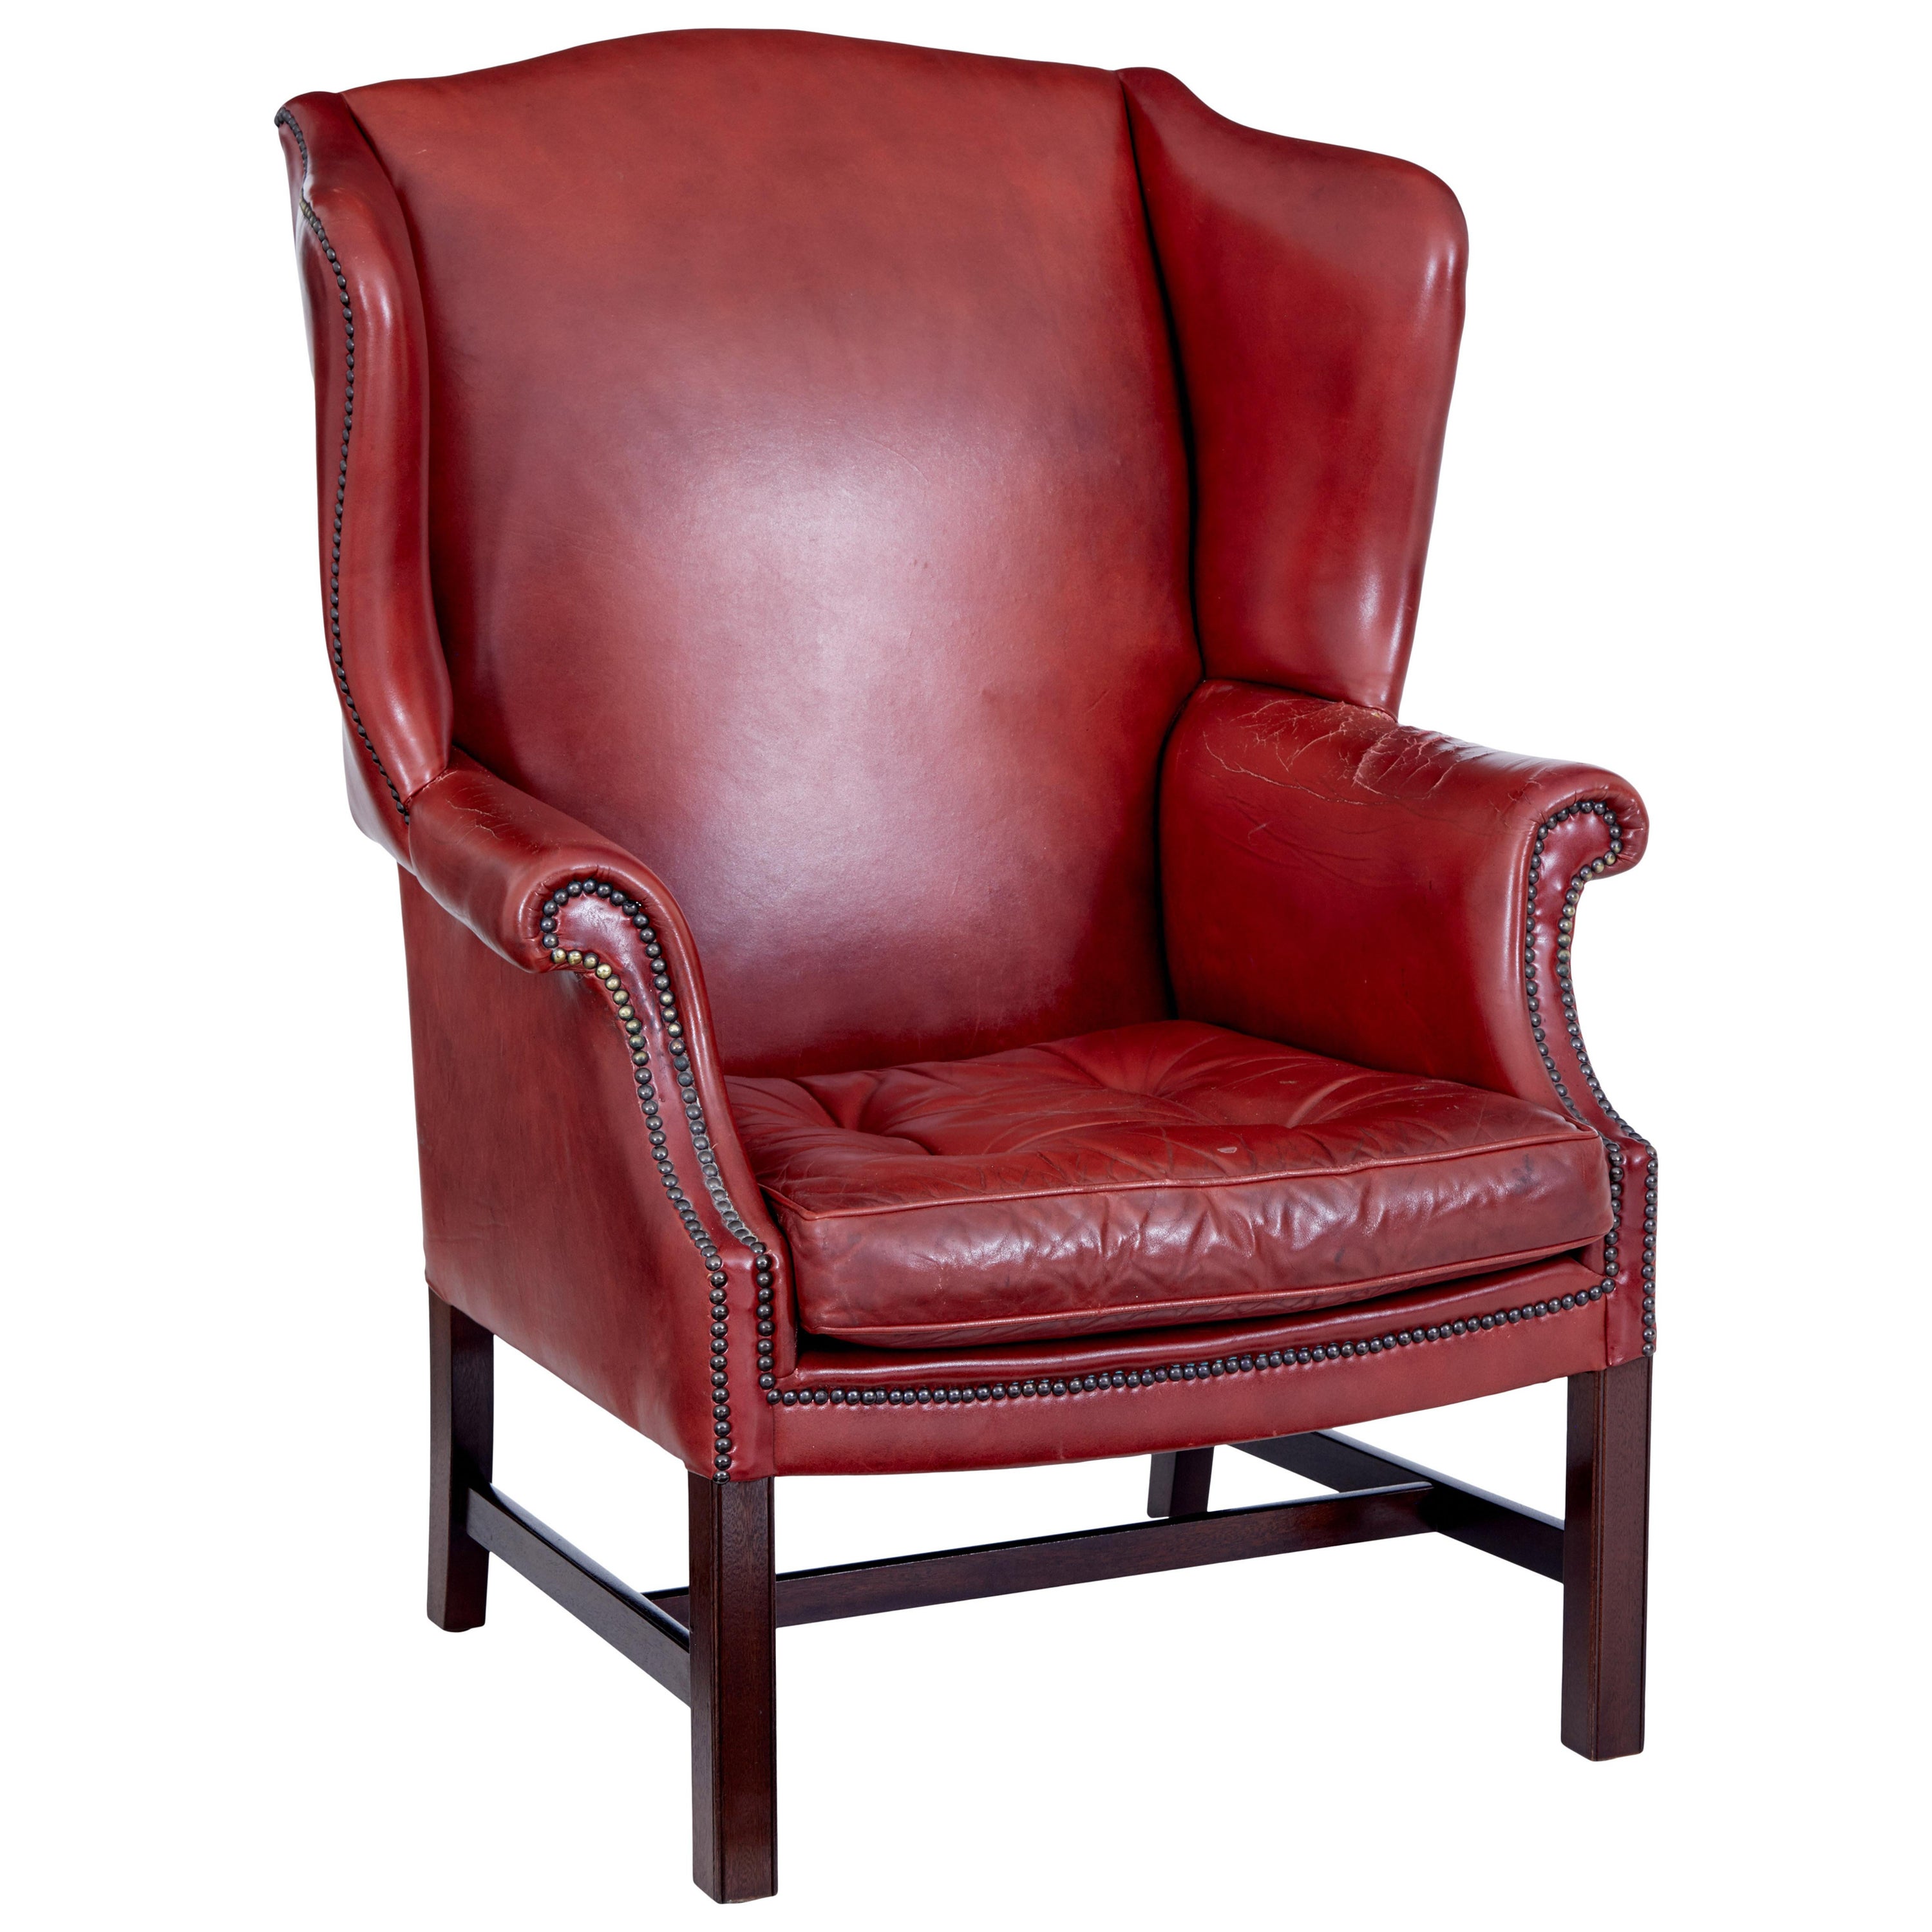 Mid 20th century leather wingback armchair For Sale